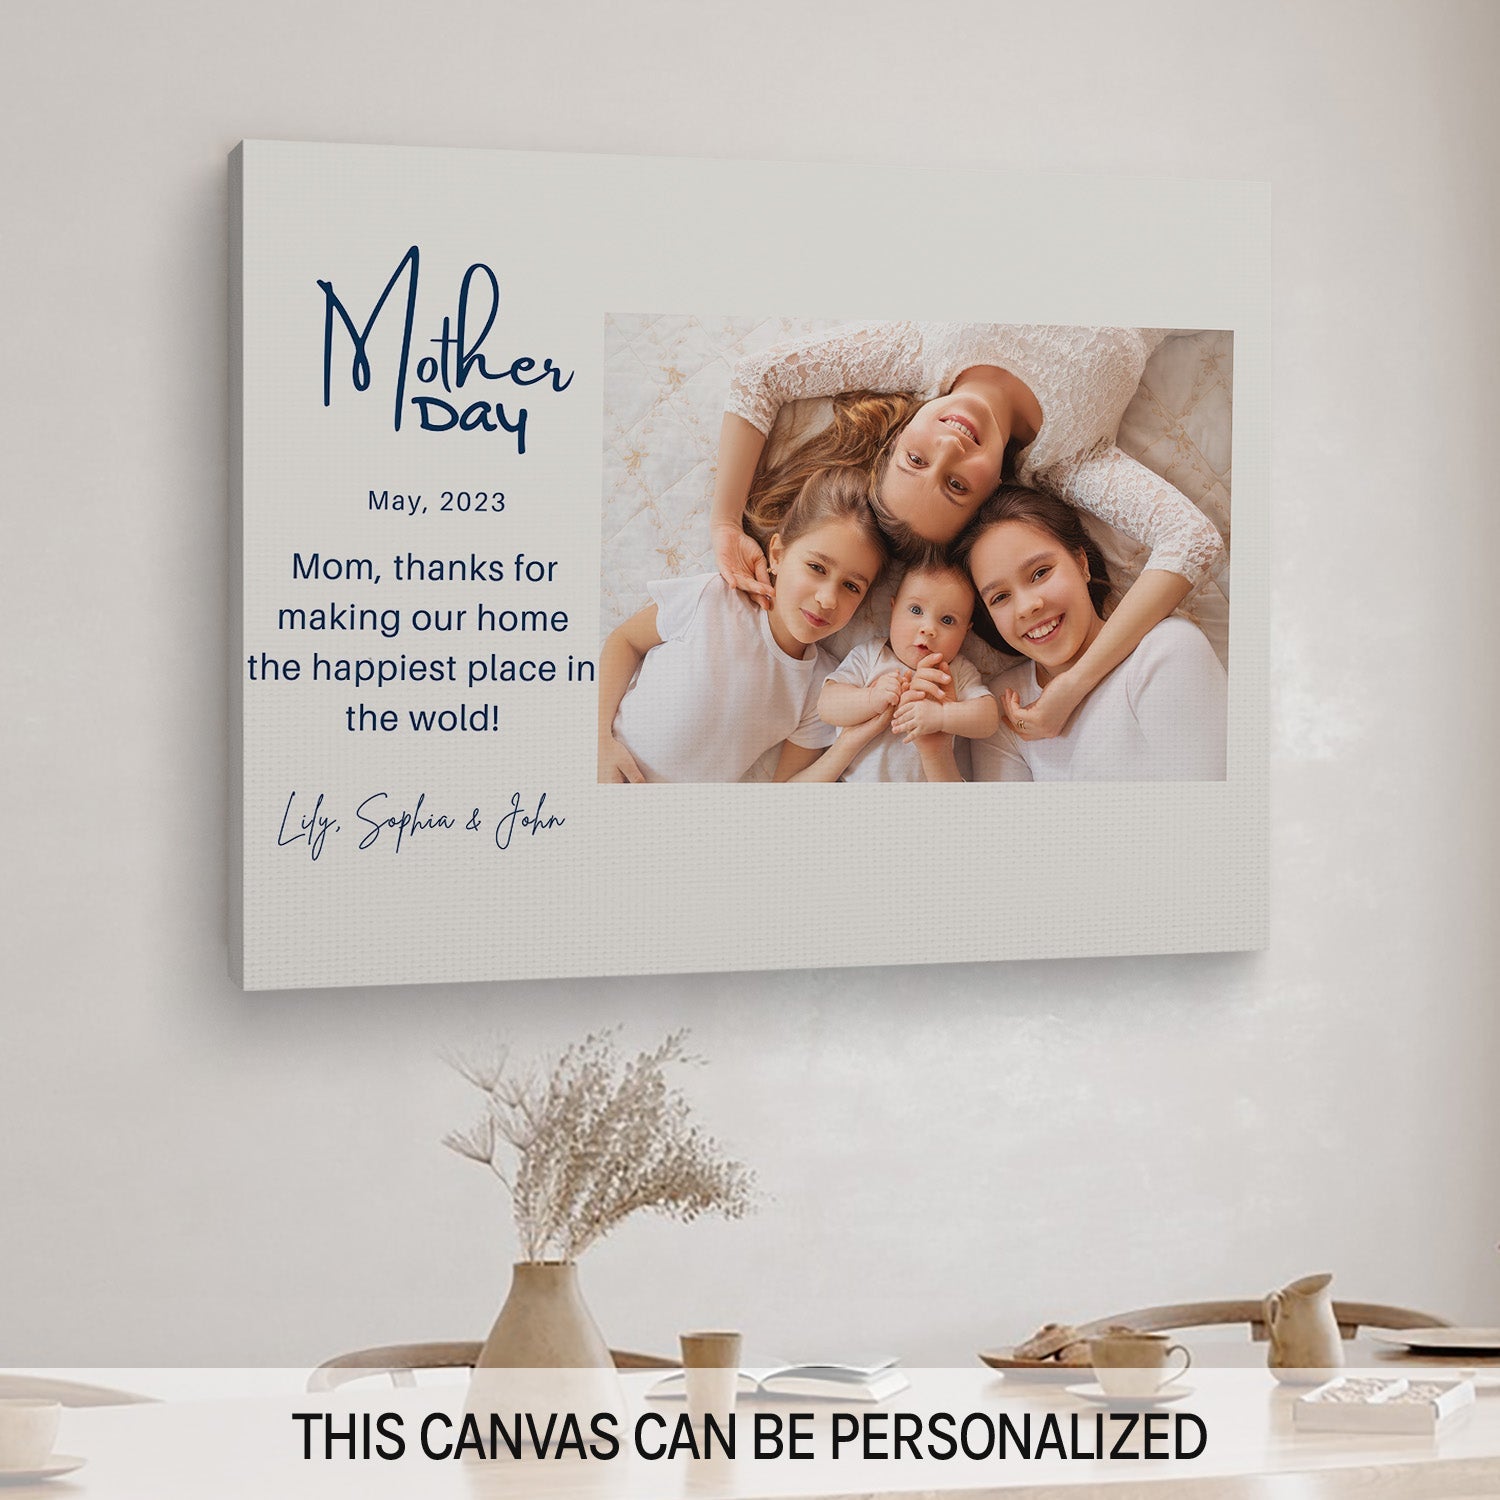 Personalized Mother's Day Gifts: Shop Collages & More | CanvasPeople